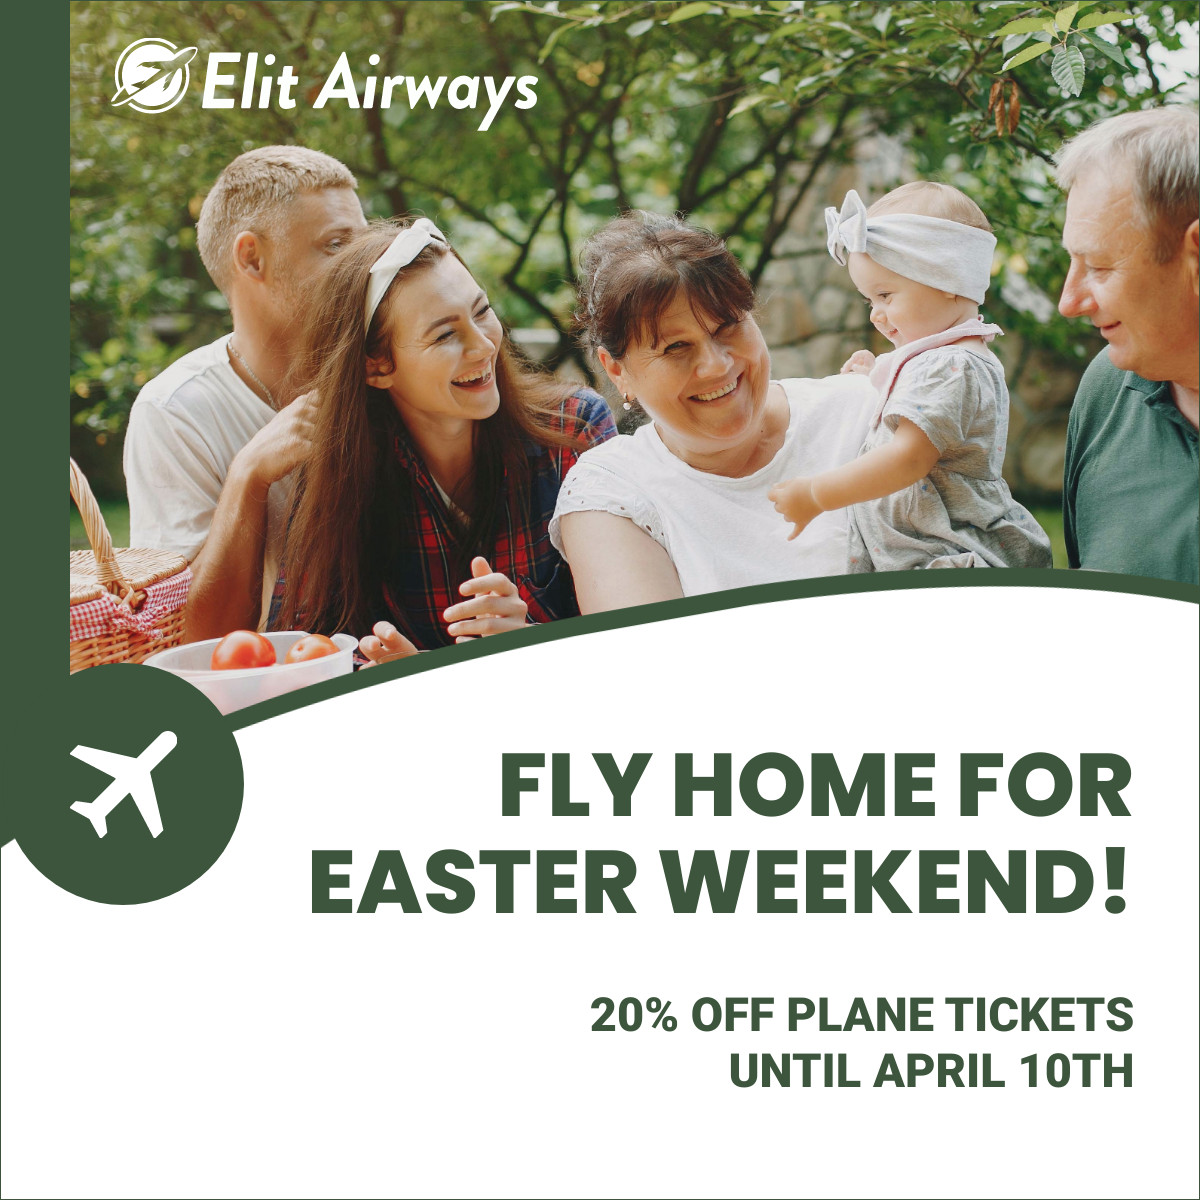 Fly Home for Easter Weekend